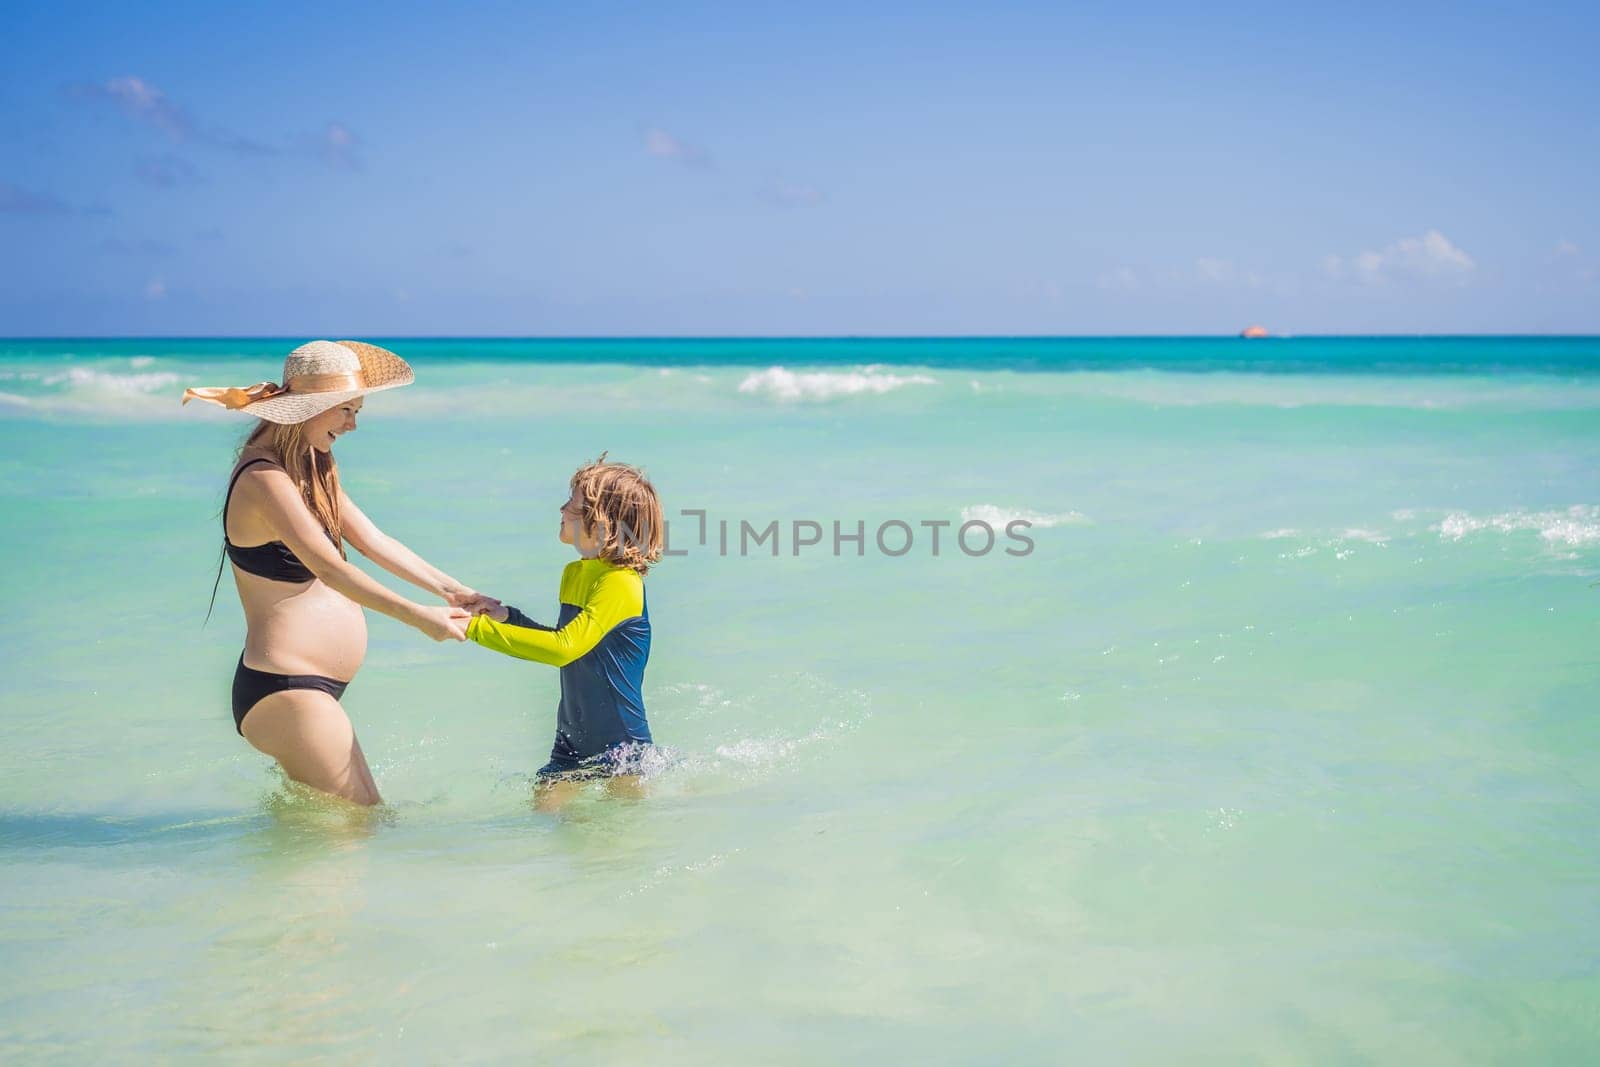 A radiant pregnant mother and her excited son share a tender moment on a serene, snow-white beach, celebrating family love amidst nature's beauty by galitskaya